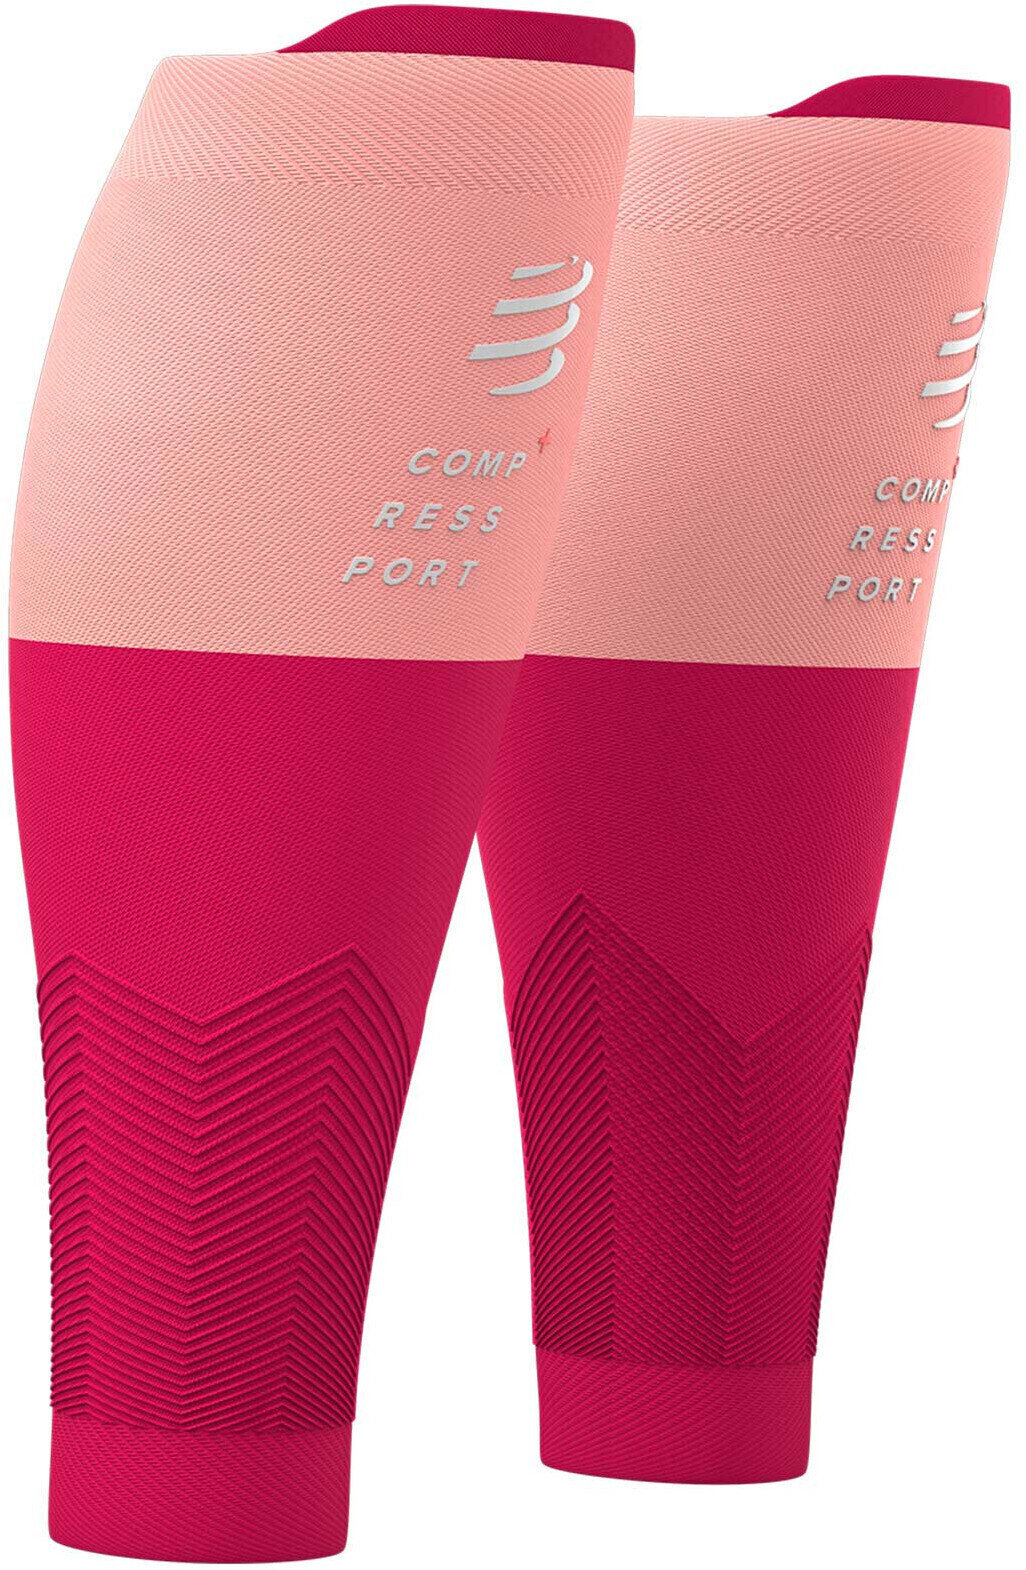 Calf covers for runners Compressport R2v2 Pink T3 Calf covers for runners